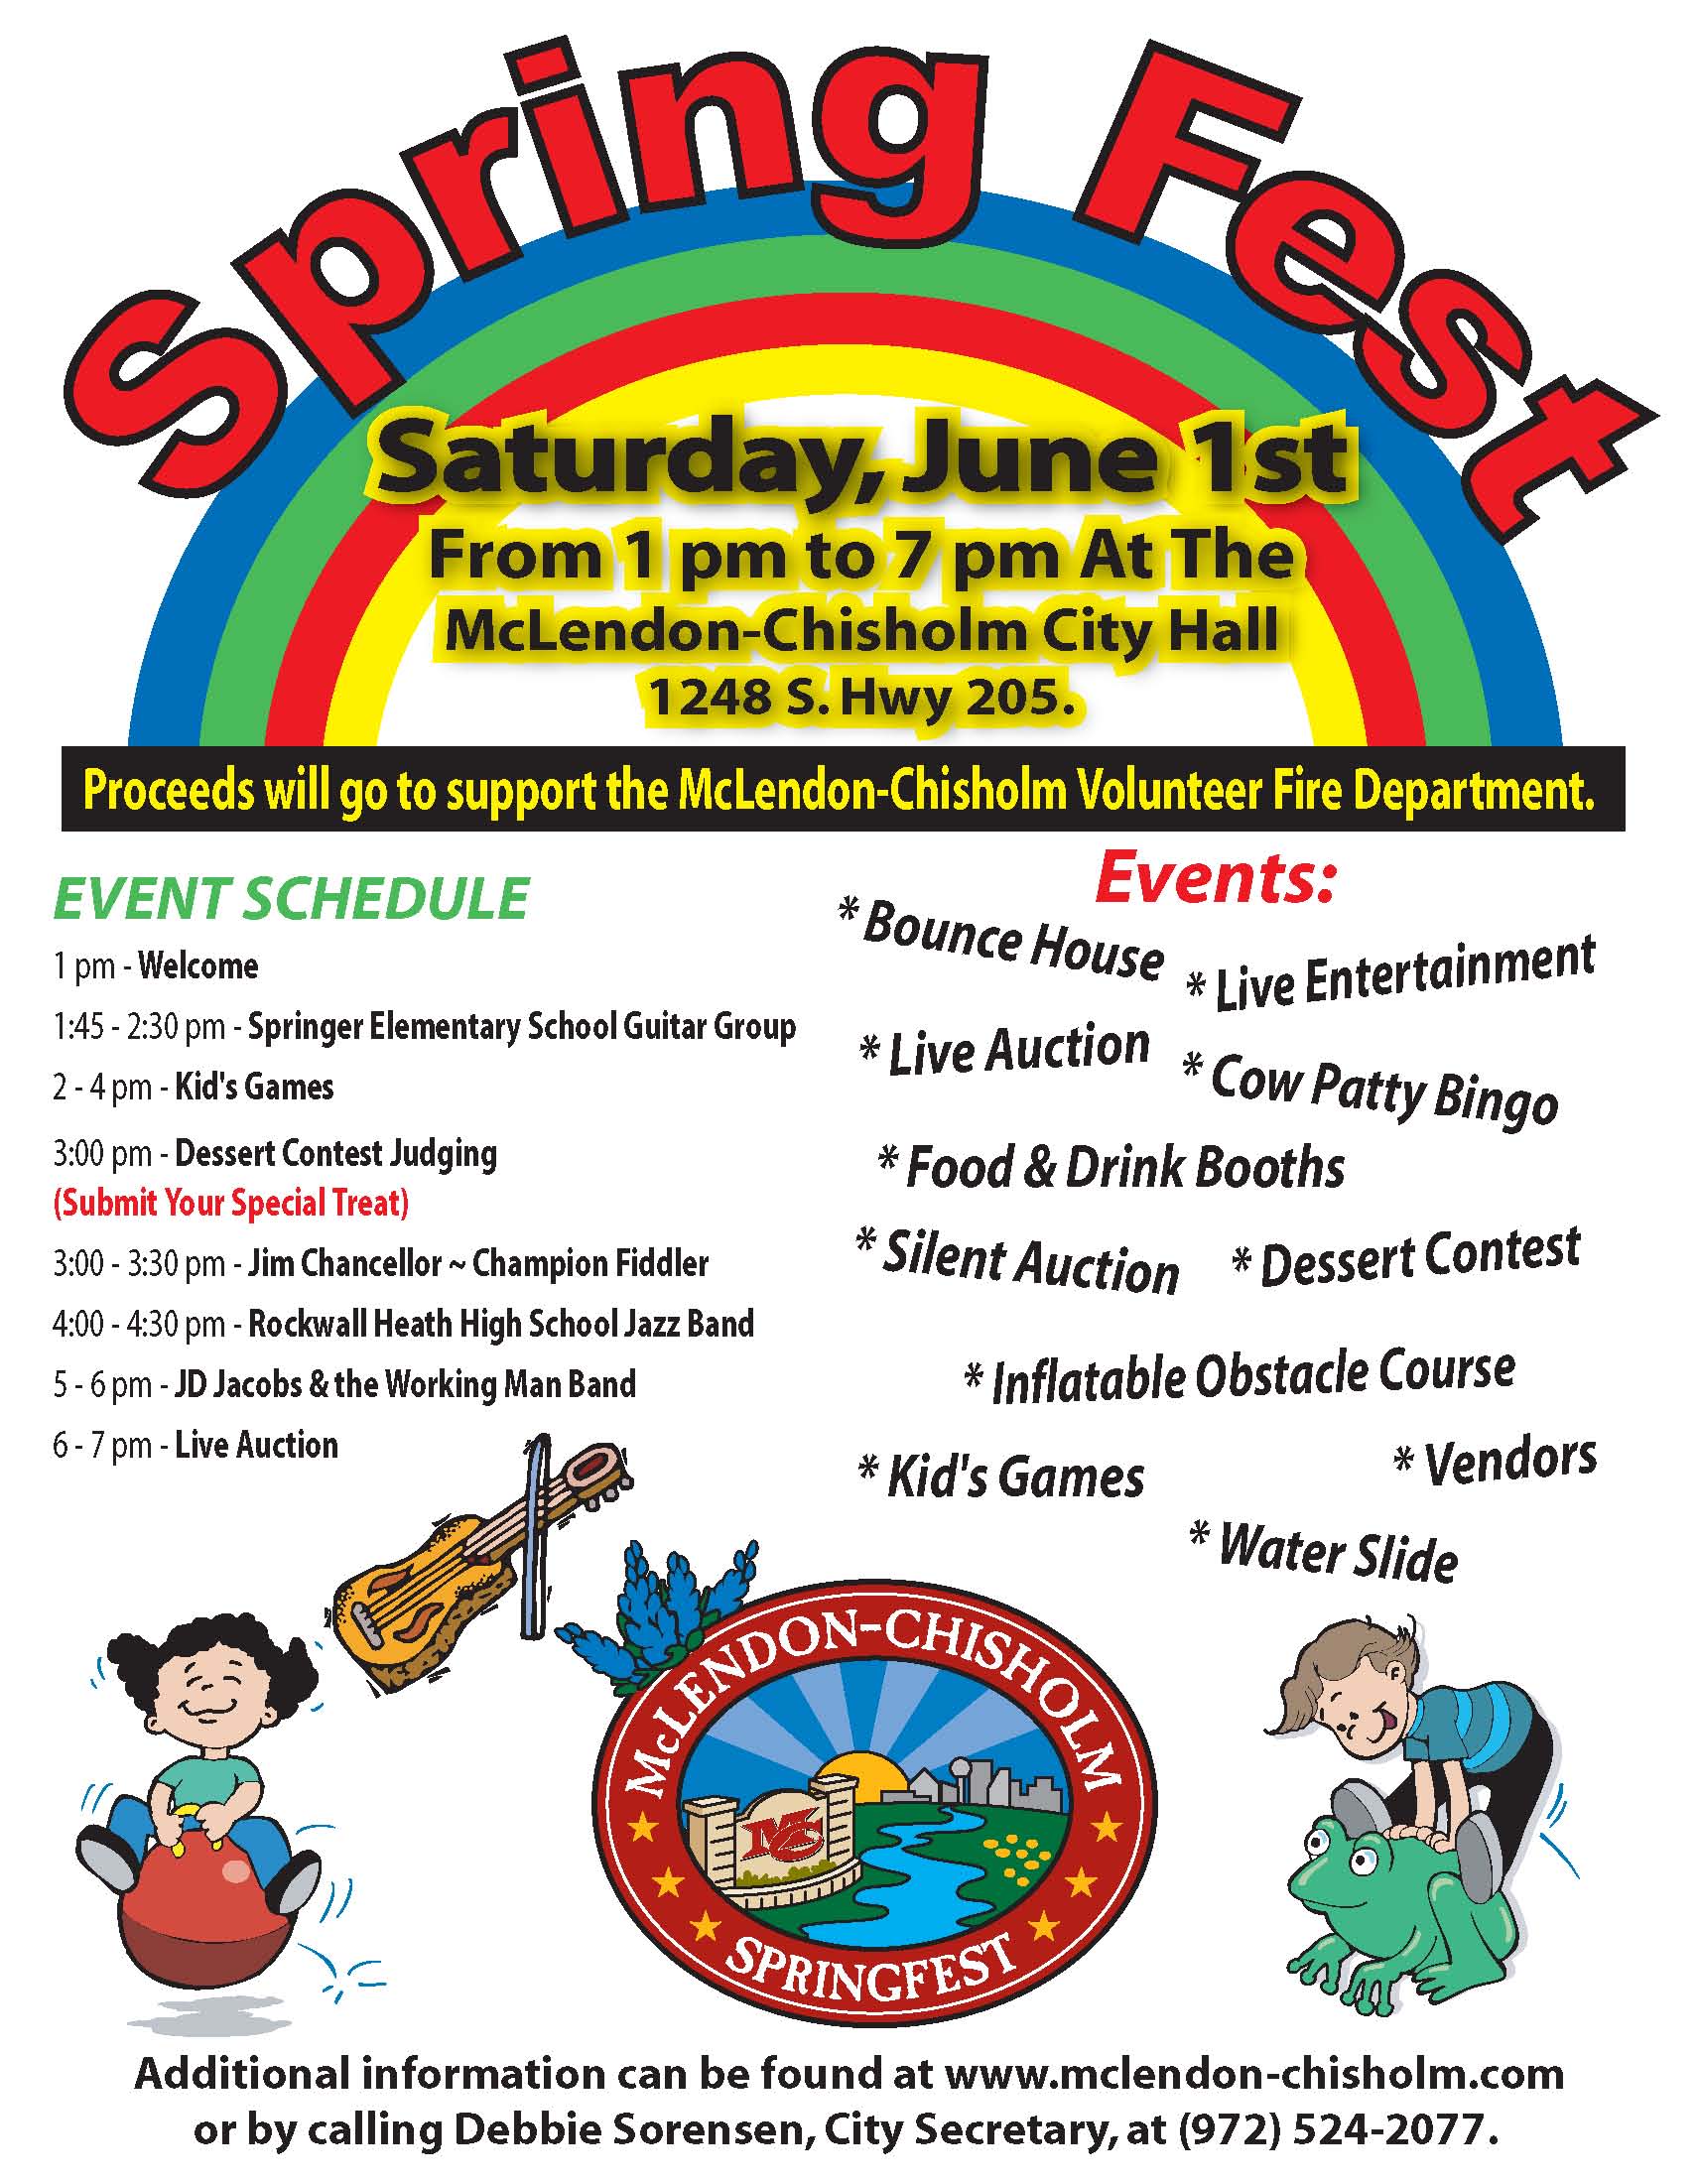 SpringFest Saturday to benefit McLendon-Chisholm fire dept